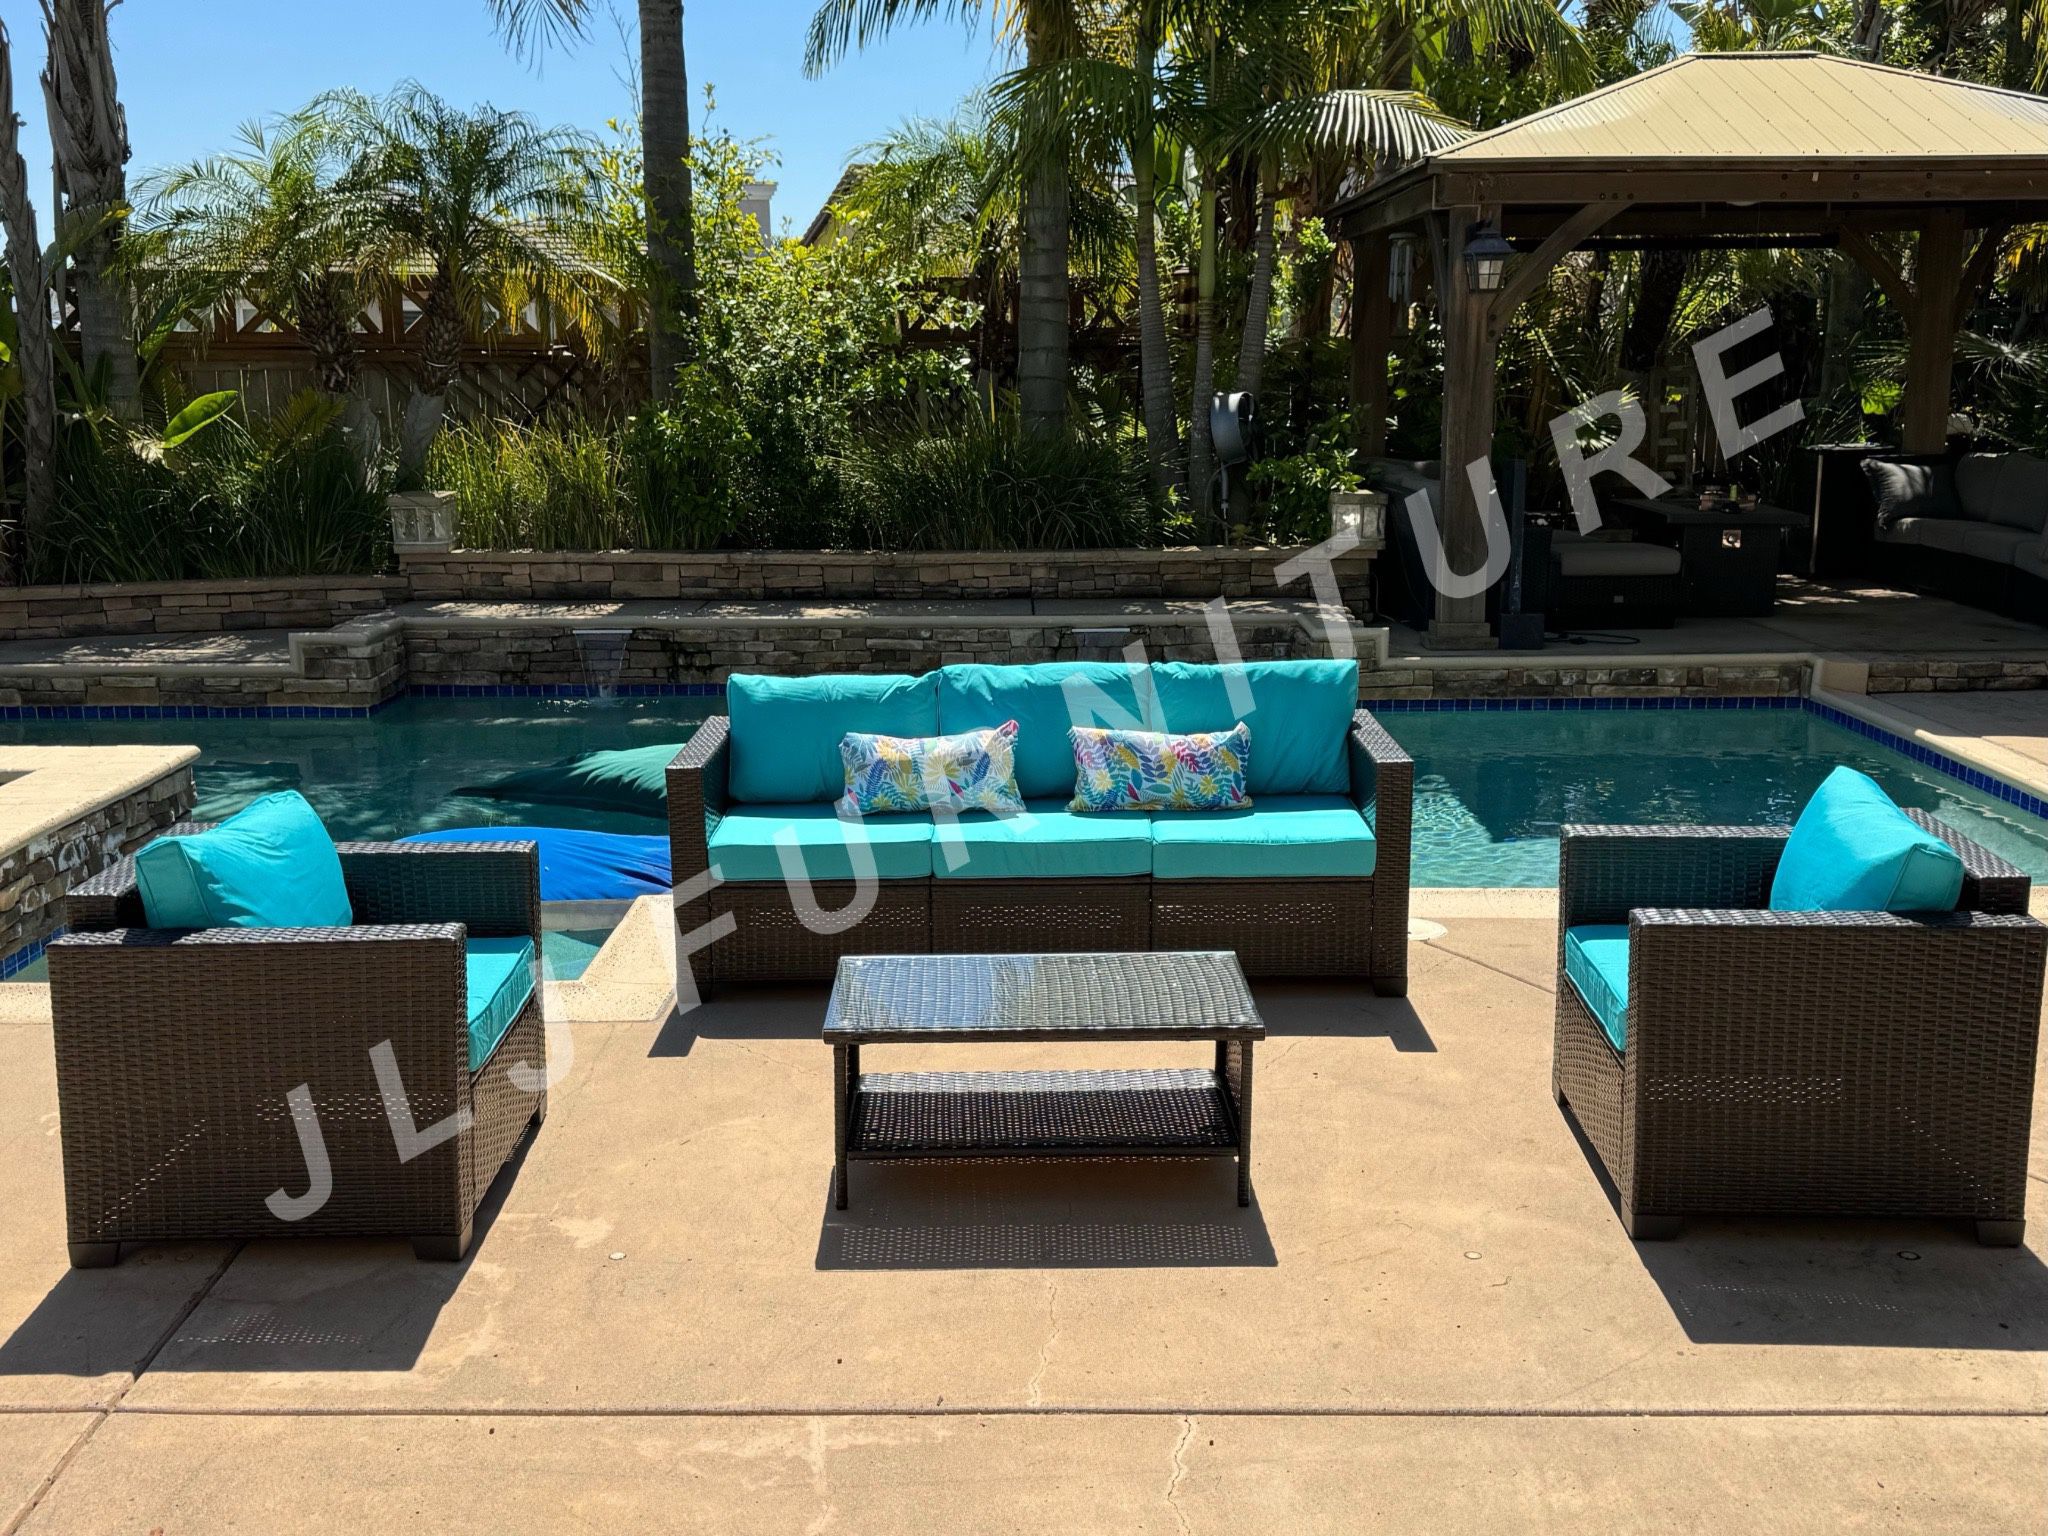 NEW🔥Outdoor Patio Furniture 4 Pc Brown Wicker Turquoise Cushions Conversation Set ASSEMBLED